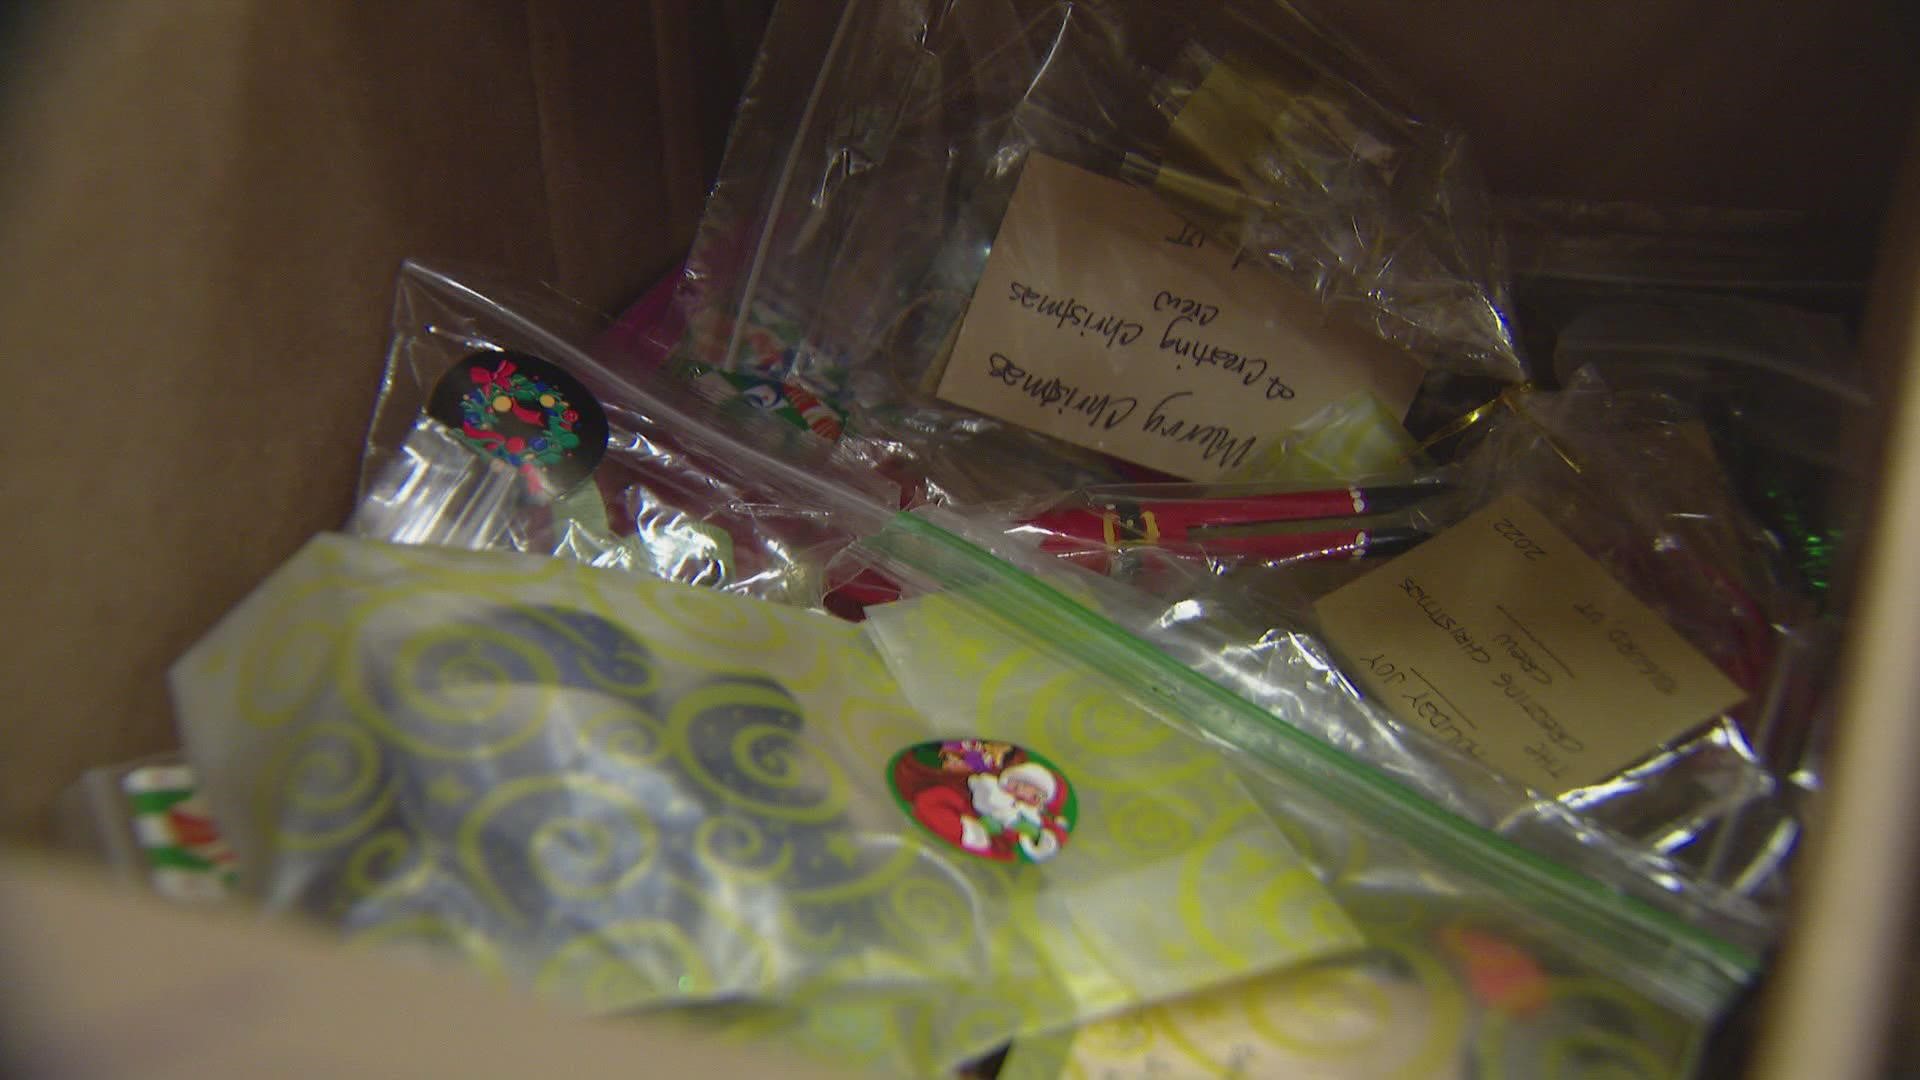 More than 7,000 ornaments were sent to Colorado from as far as Japan.